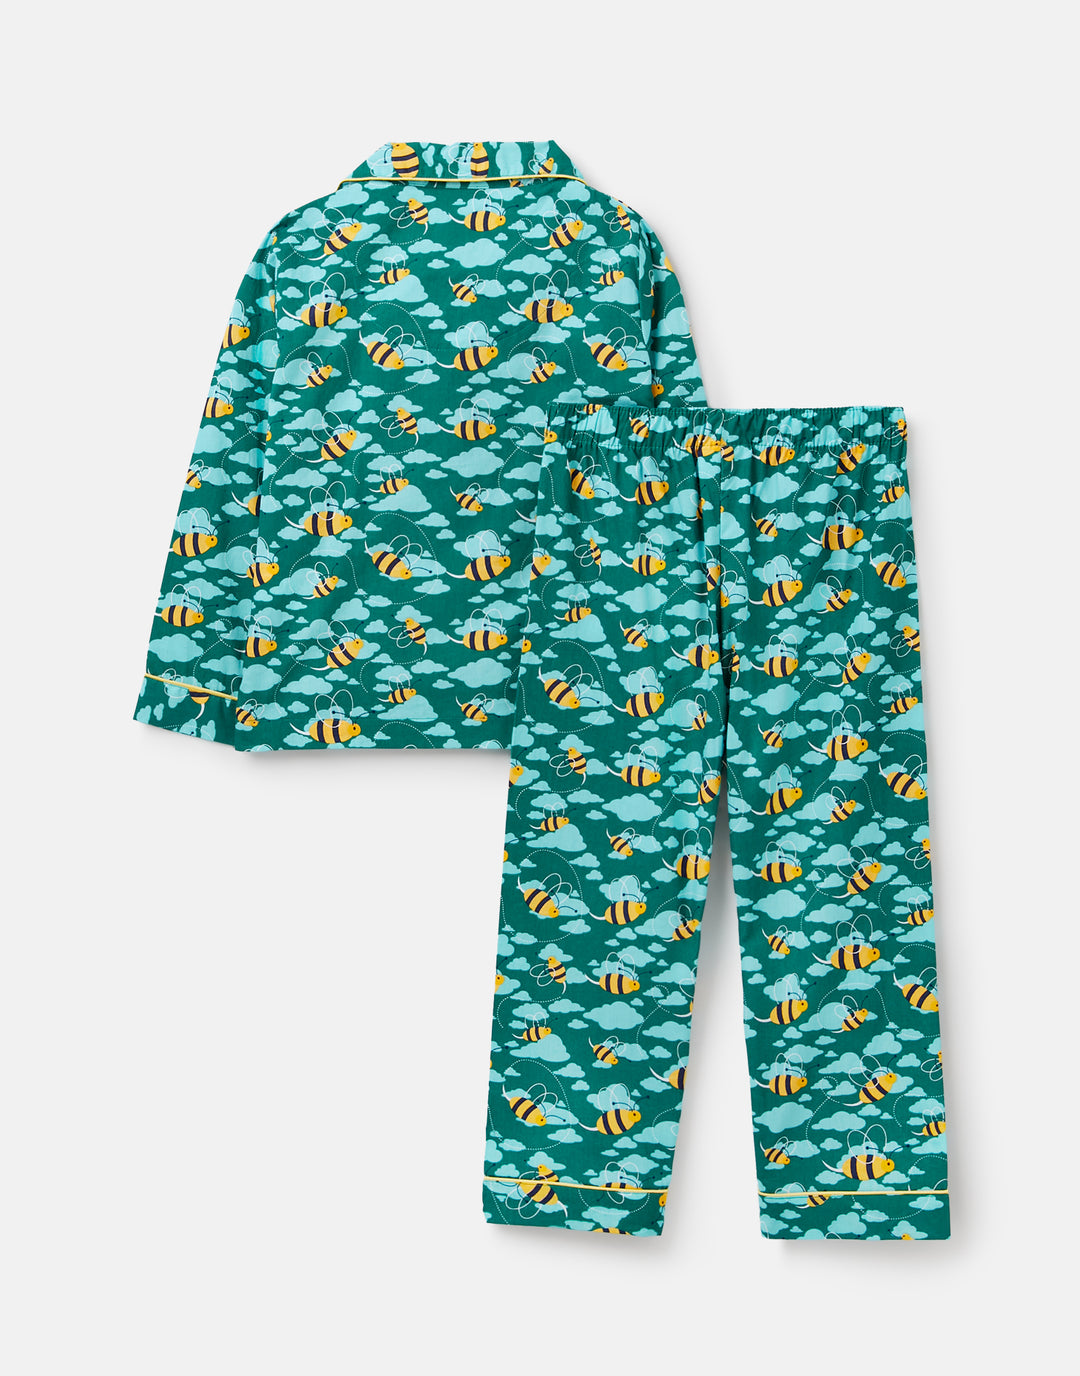 Busy Bees Boys Button-Up Pyjamas in Organic Cotton